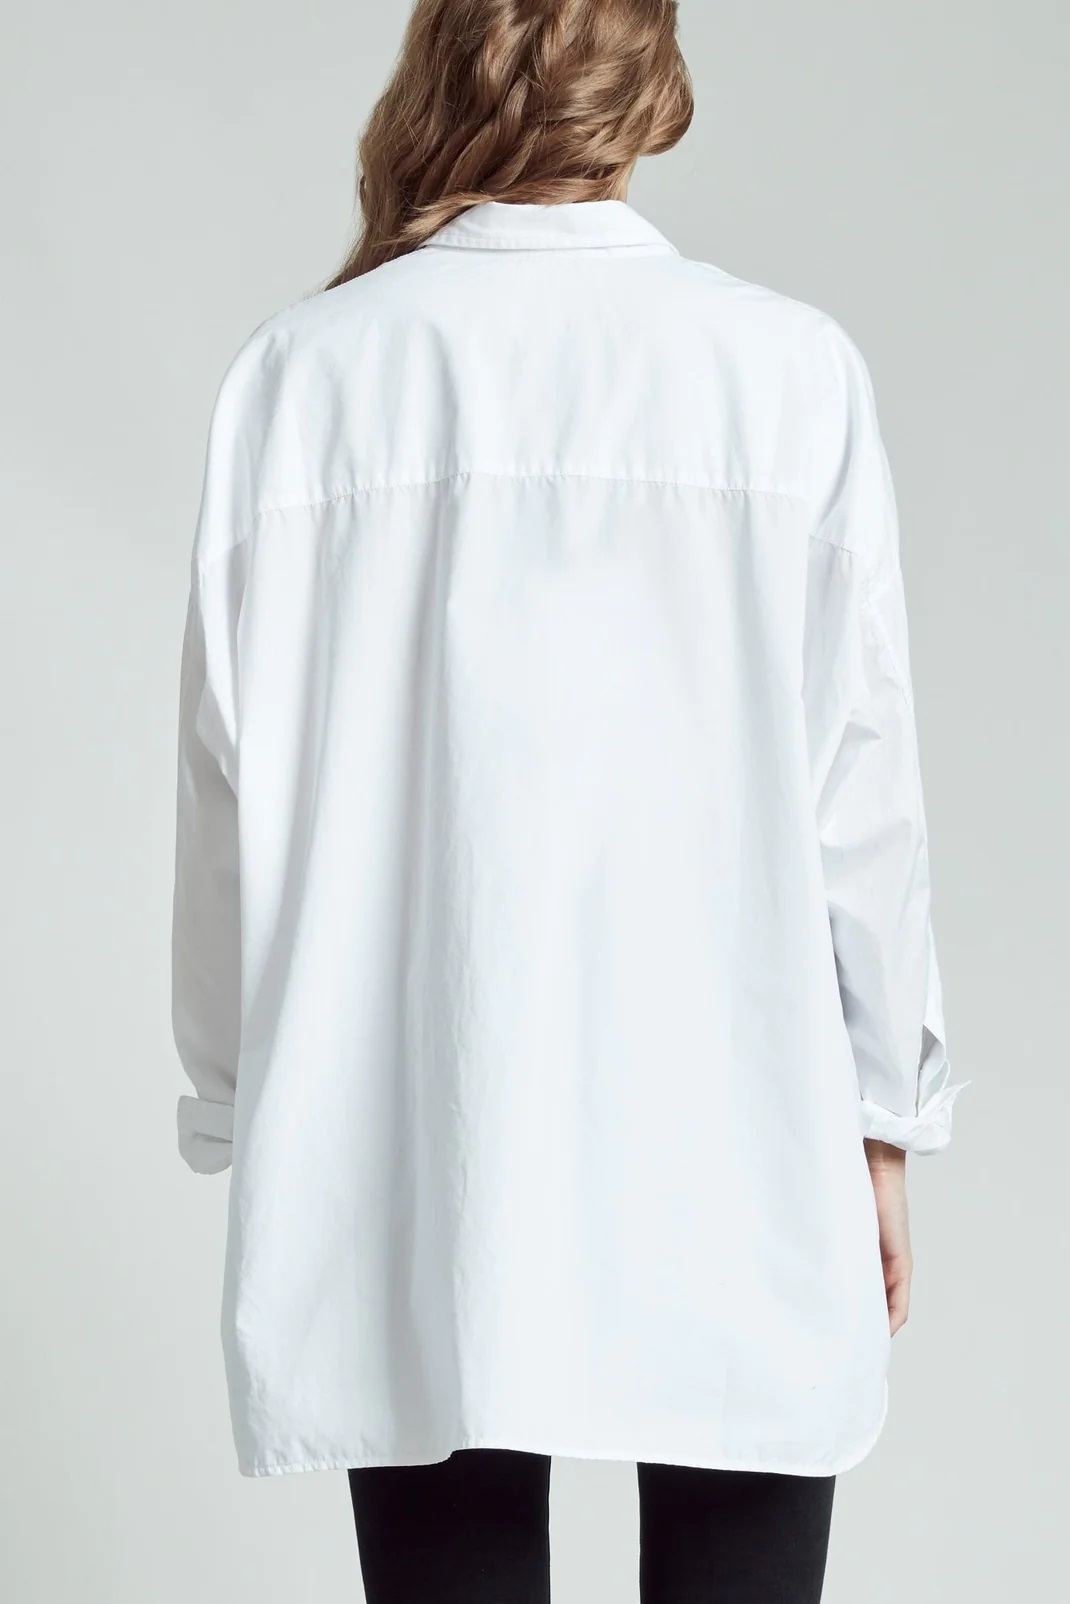 R13 Drop Neck Oxford Shirt in White M